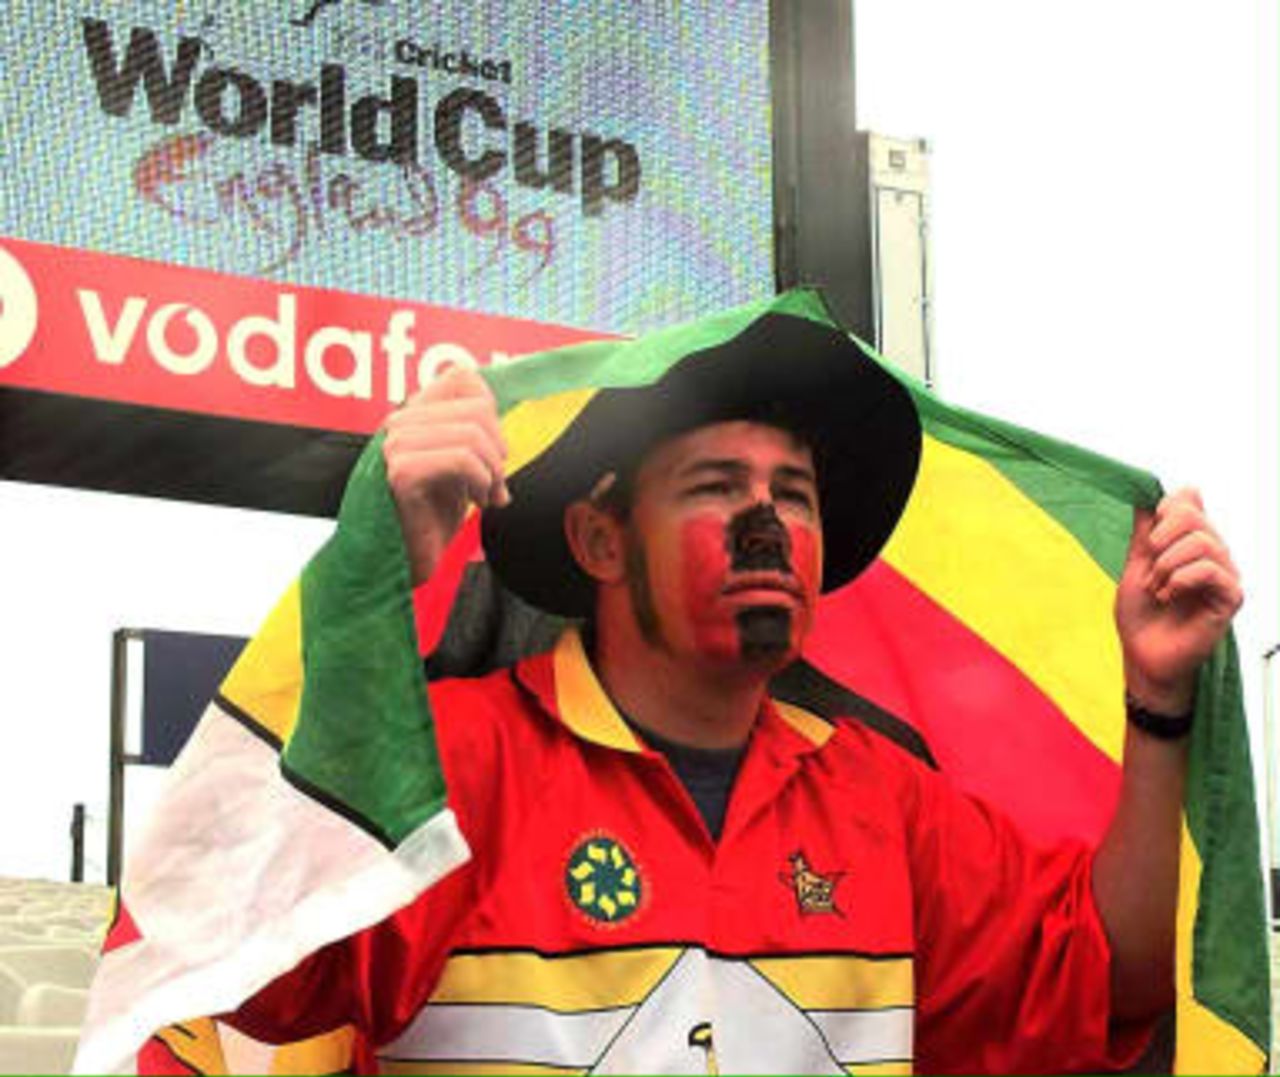 A Zimbabwe cricket supporter shelters from rain at Headingley 07 June 1999. The rain held up play between Zimbabwe and New Zealand for the second day in a row